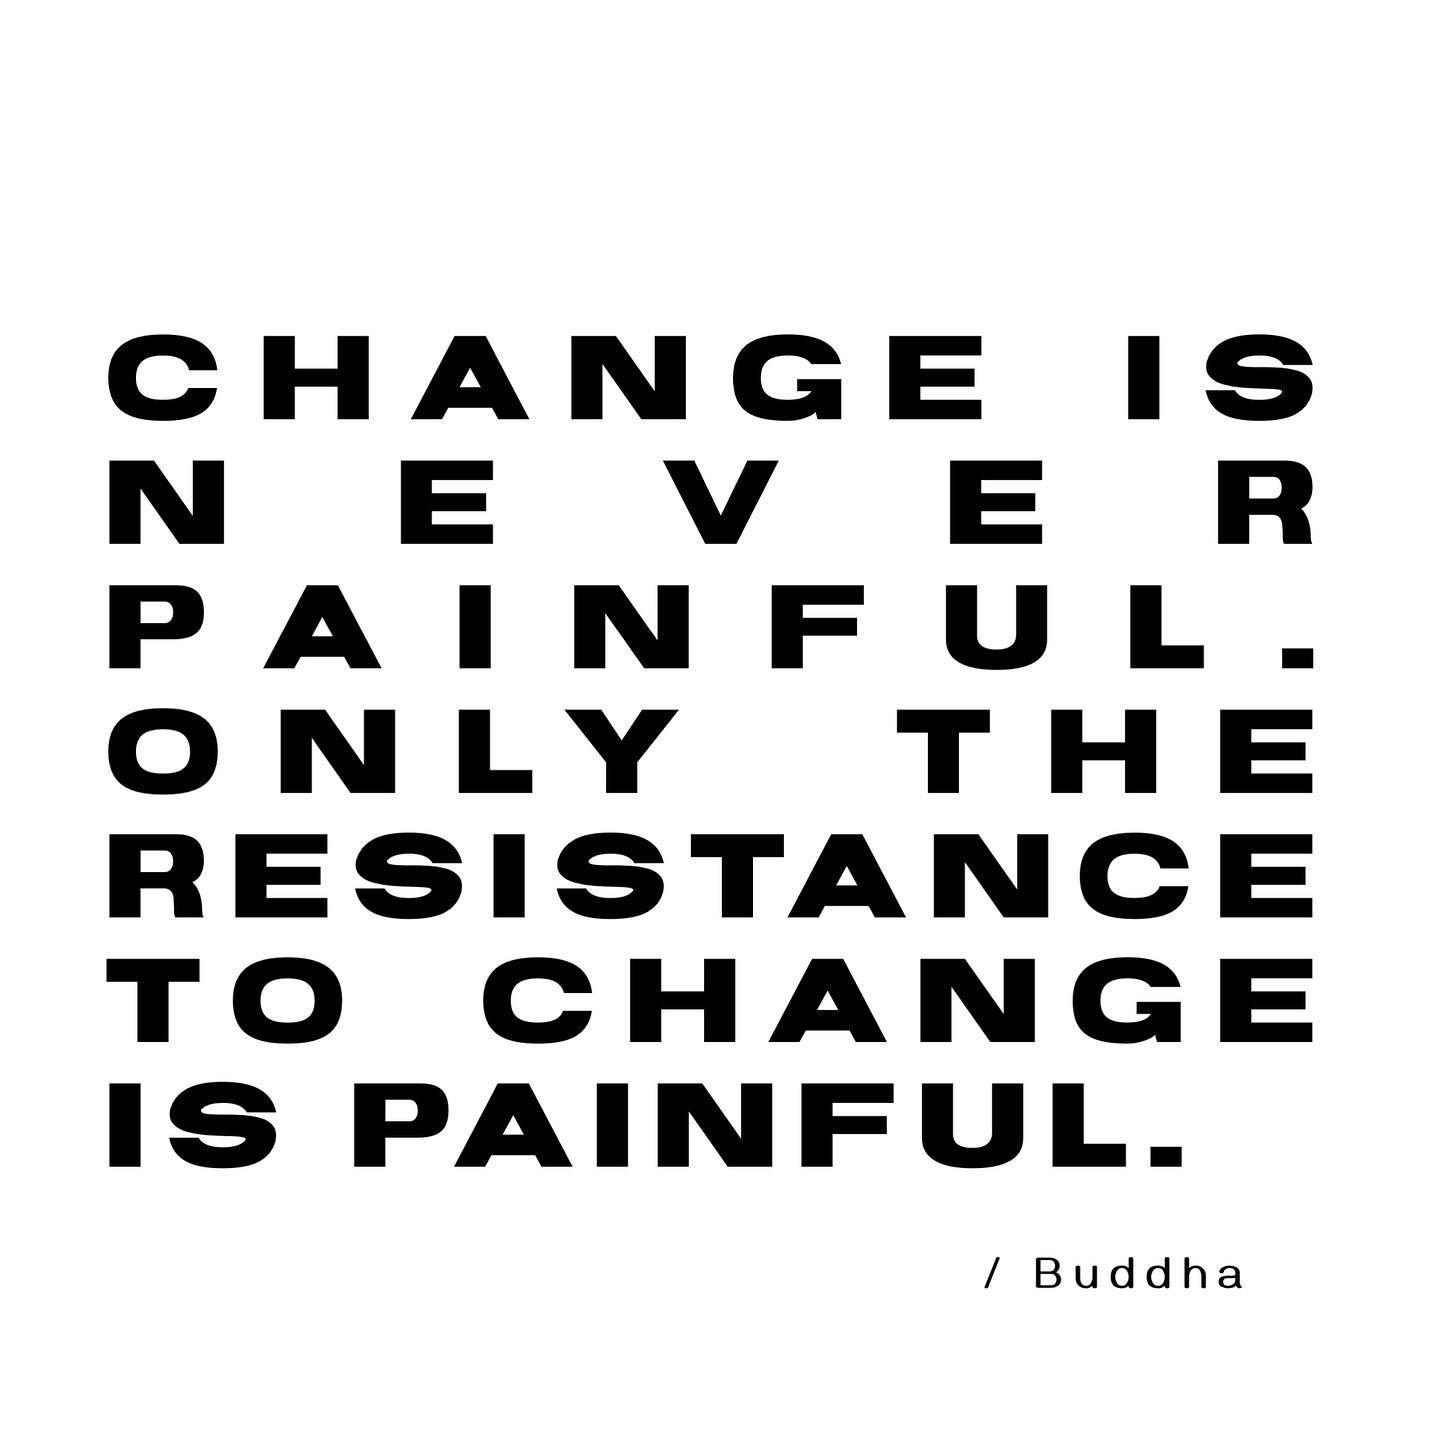 Nervous System + Trauma Support - There’s so many reasons why we resist change, but the biggest one